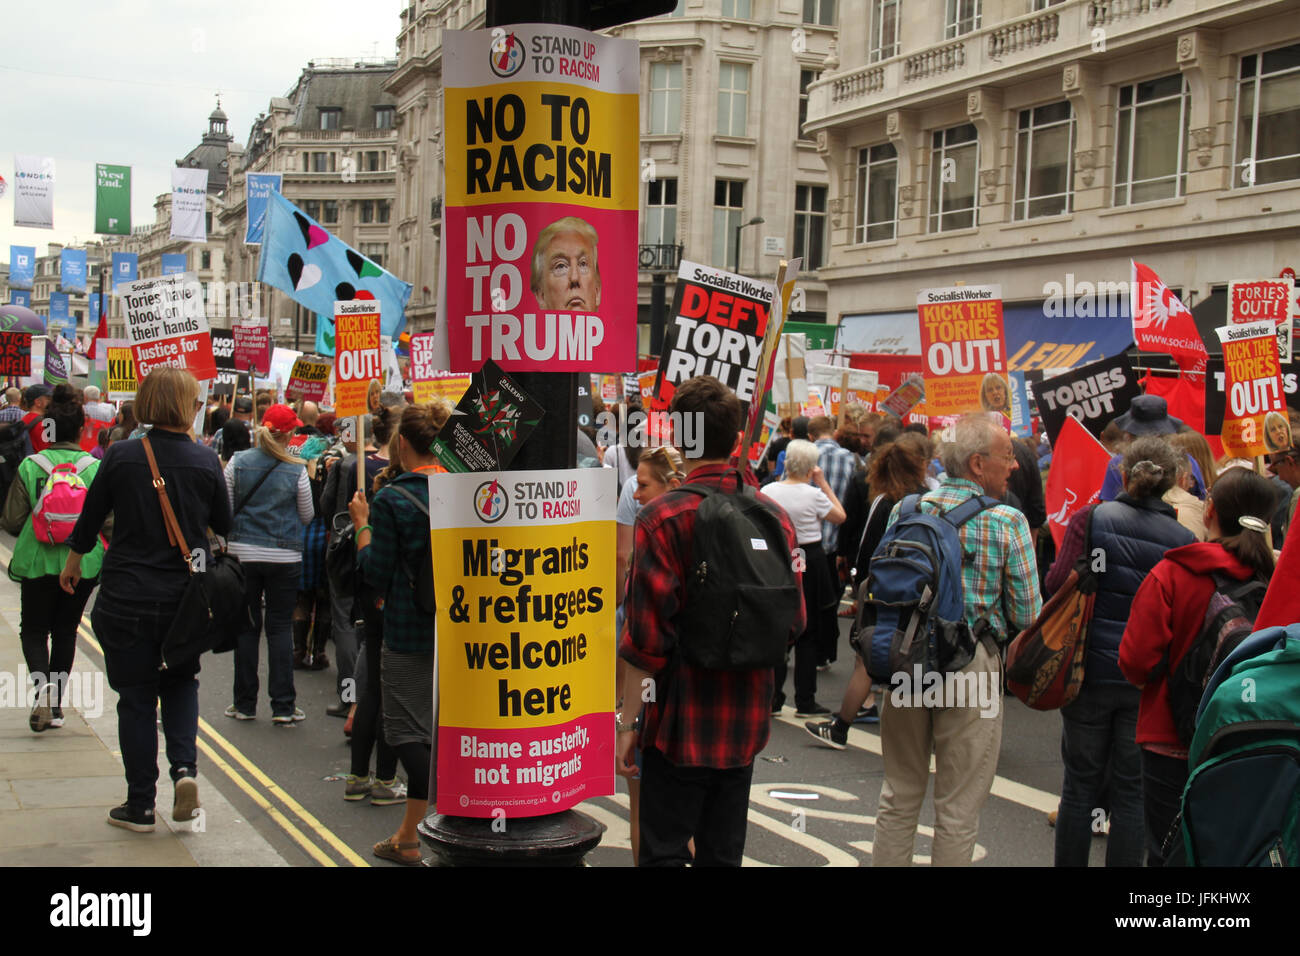 London, UK - 1 July 2017 - Demonstrators took to the streets in a national demonstration demanding for an end of the Tory government on 1 July.The demo began at Portland Place with demonstrators marching to Parliament Square for a rally. Credit: David Mbiyu/Alamy Live News Stock Photo